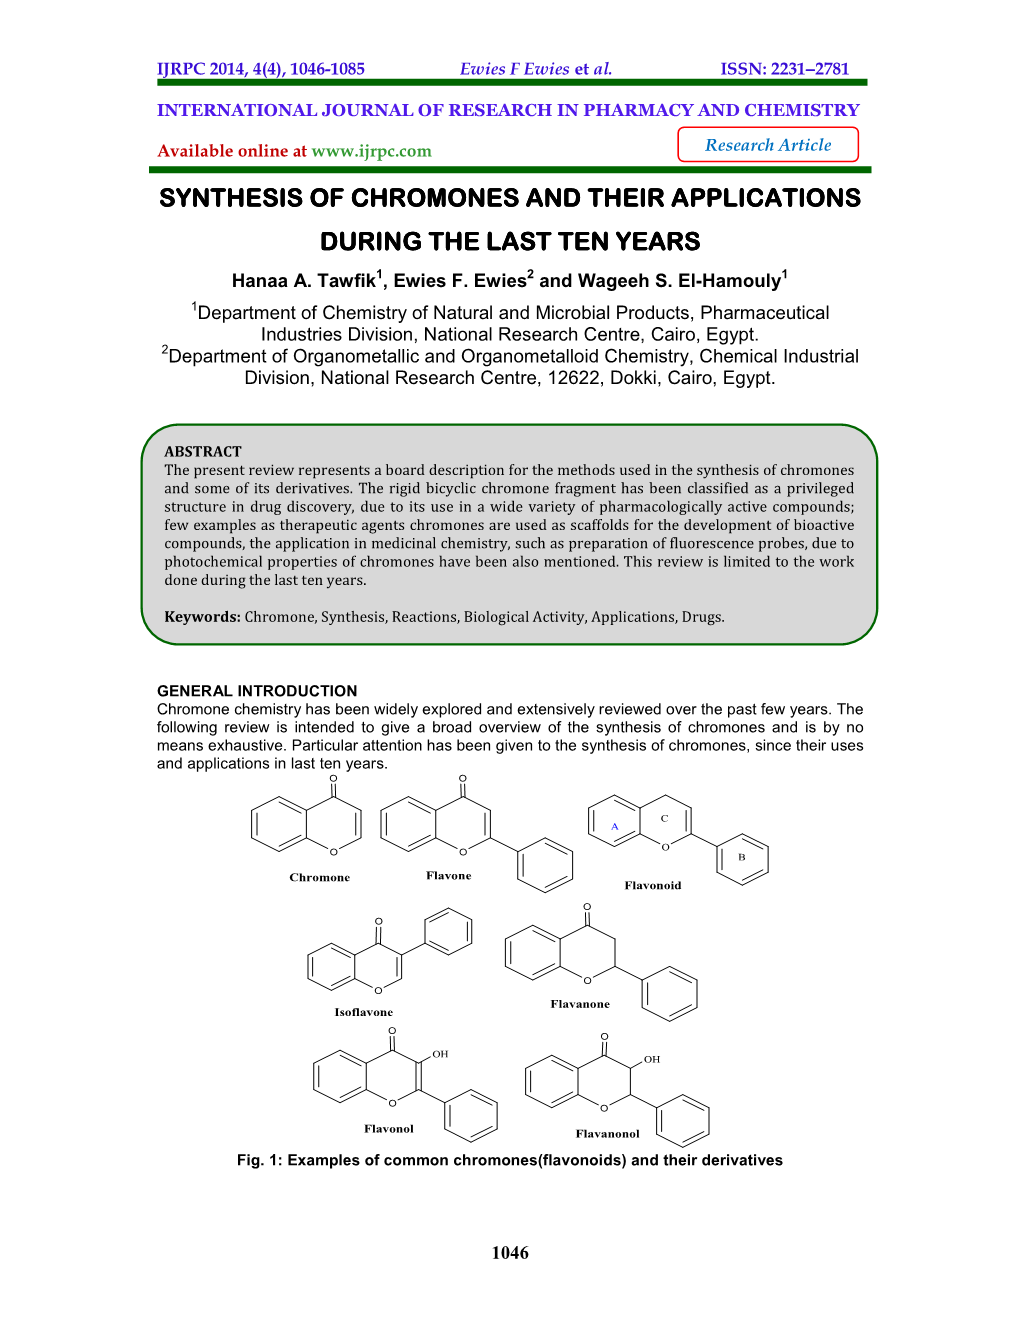 Synthesis of Chromones and Their Applications During the Last Ten Years